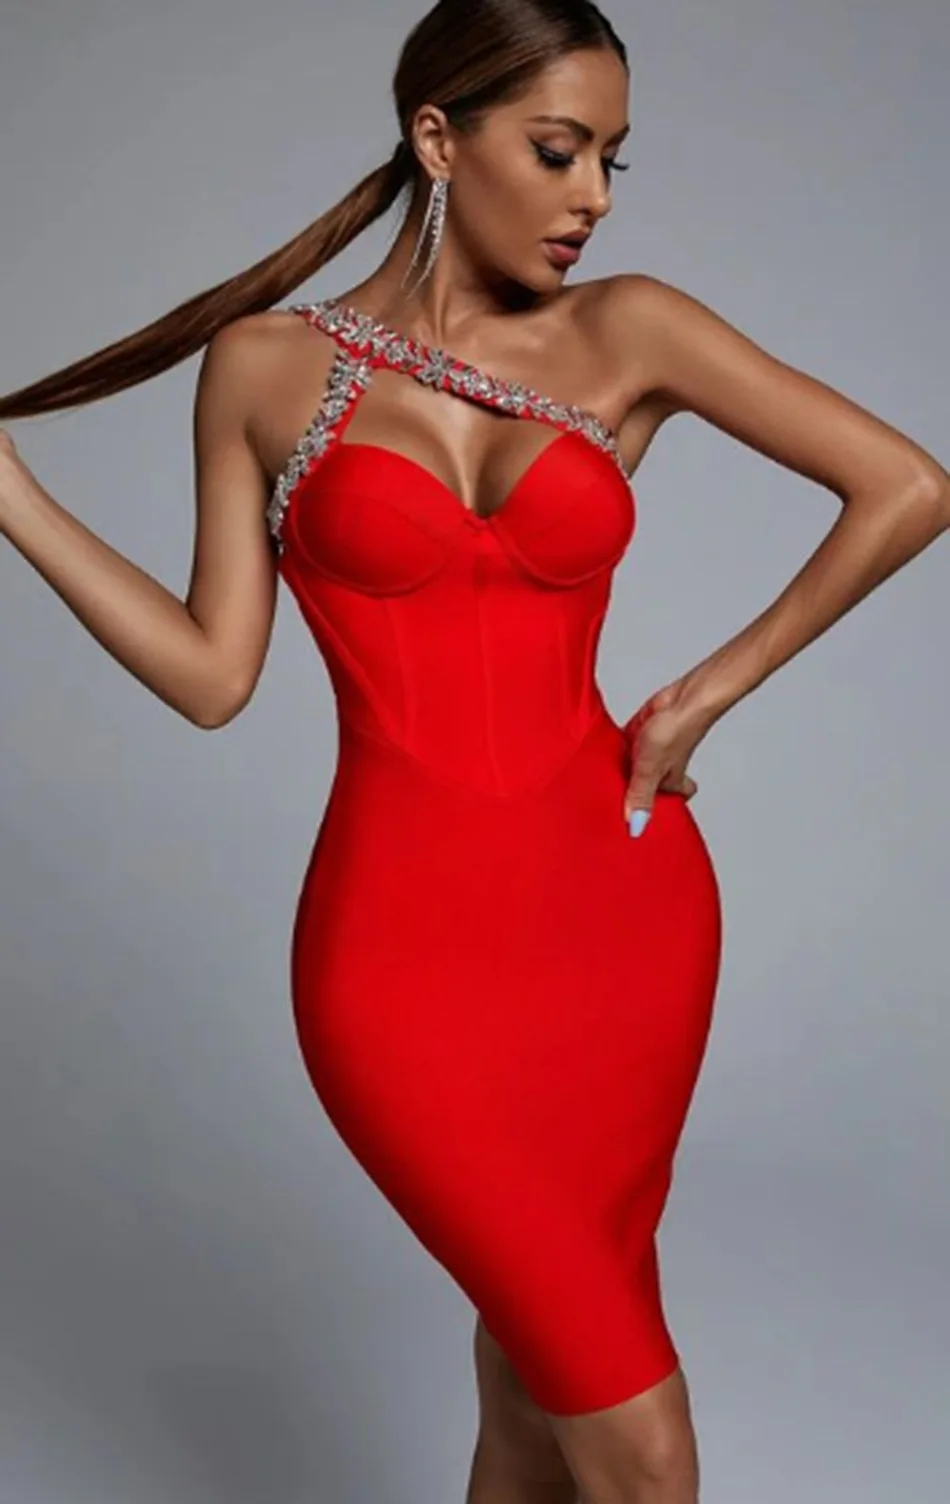 High Quality Sexy Night Bandage Dress Backless Party Dresses Women Casual Solid Color Designer Short Skirt